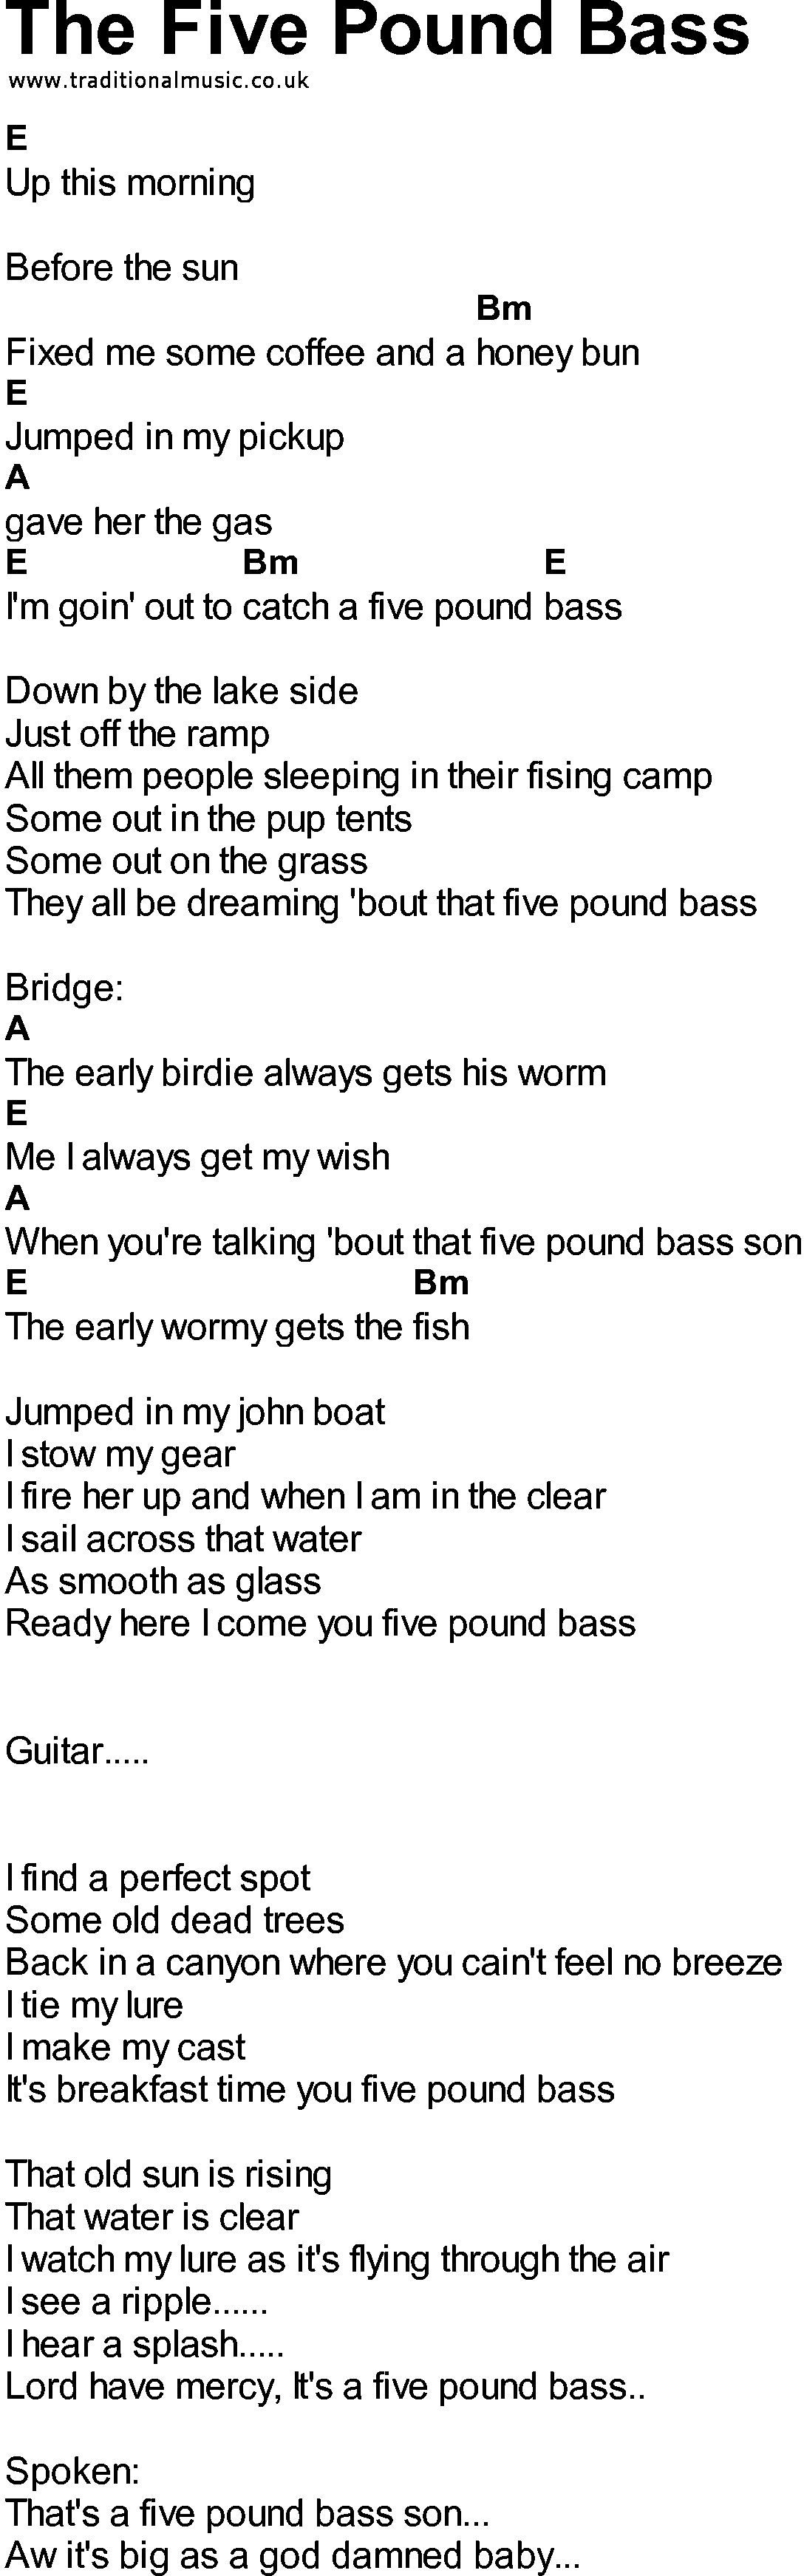 Bluegrass songs with chords - The Five Pound Bass